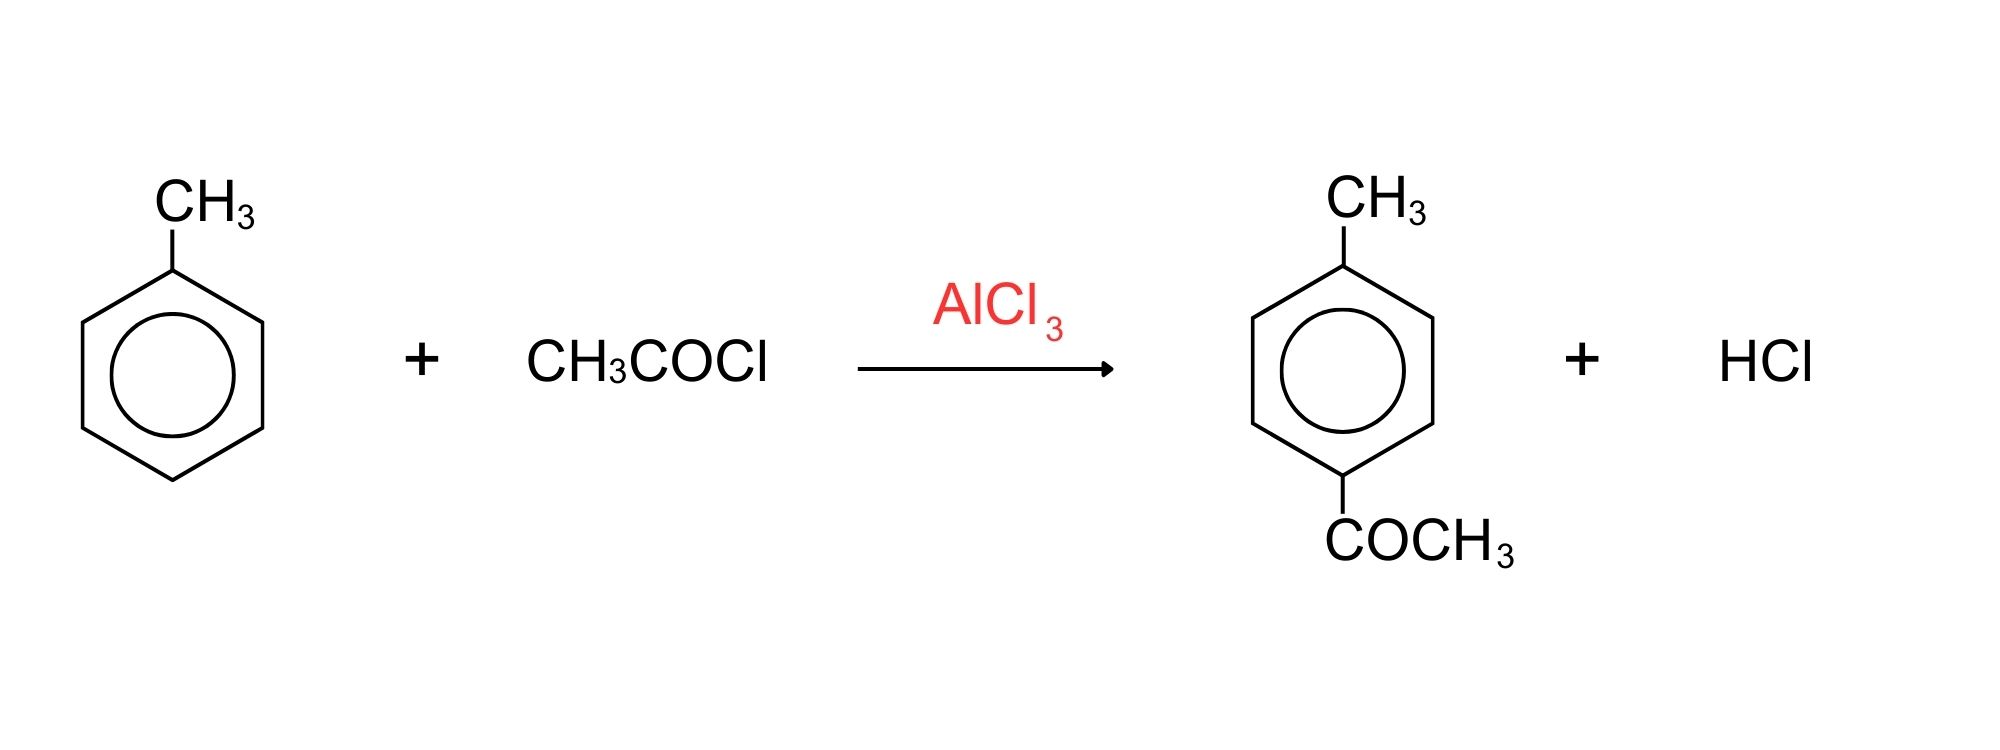 The structures involved in the reaction of methylbenzene with CH subscript 3 COCl and aluminum chloride as the catalyst to move the new group into the 4-position. 